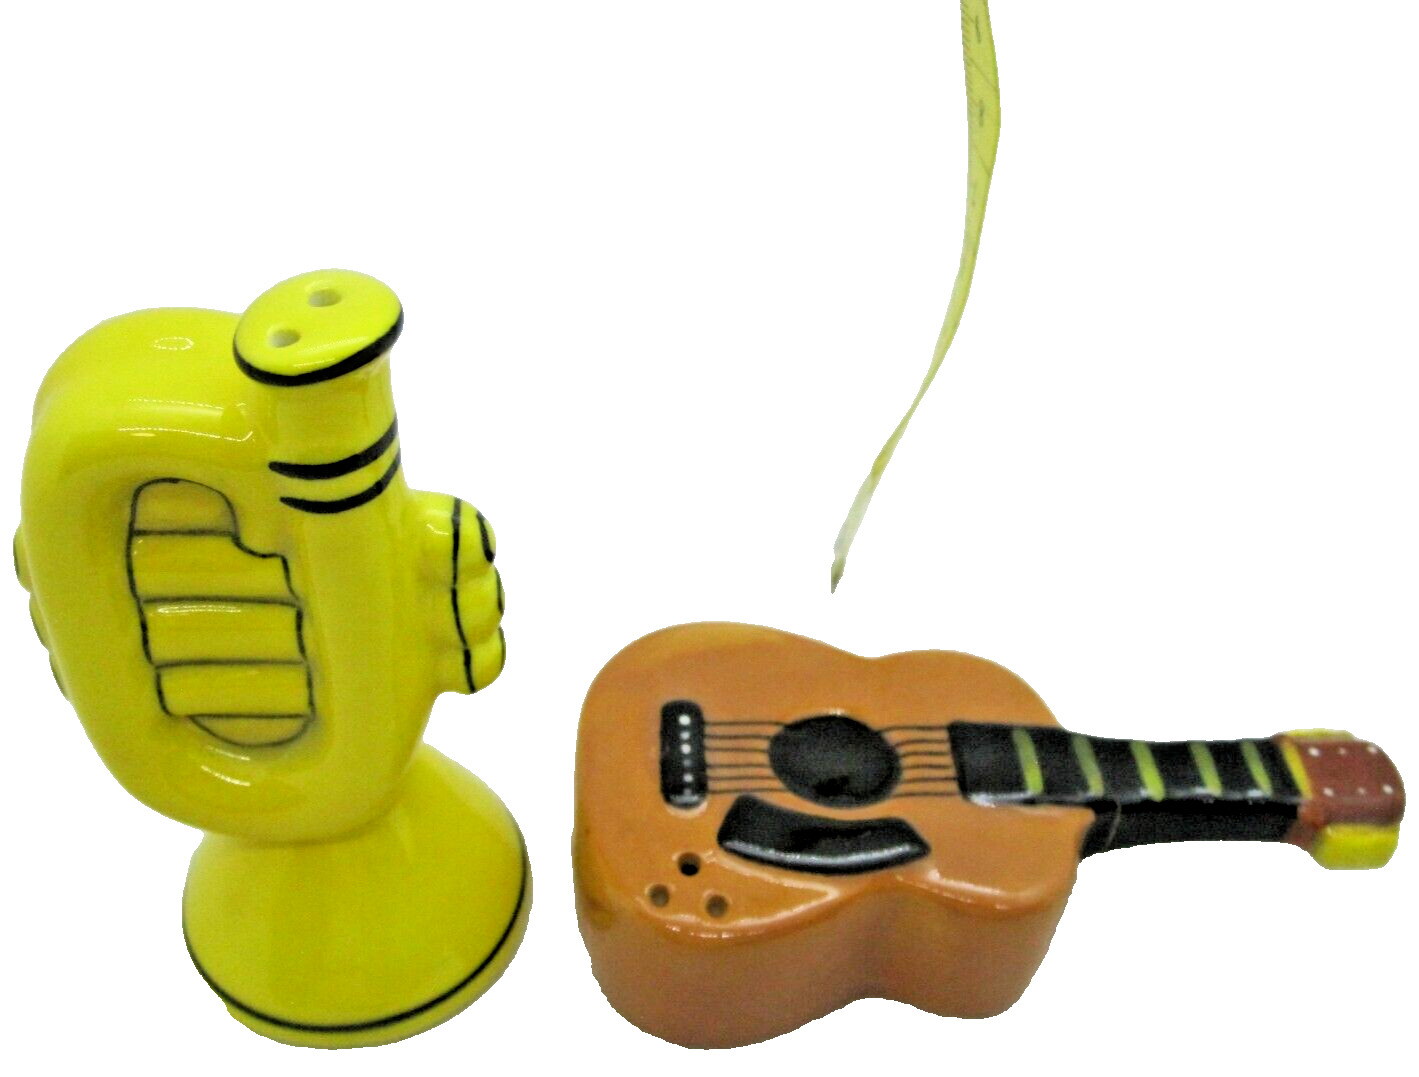 Salt and Pepper Shaker Set Yellow Trumpet And Brown Guitar